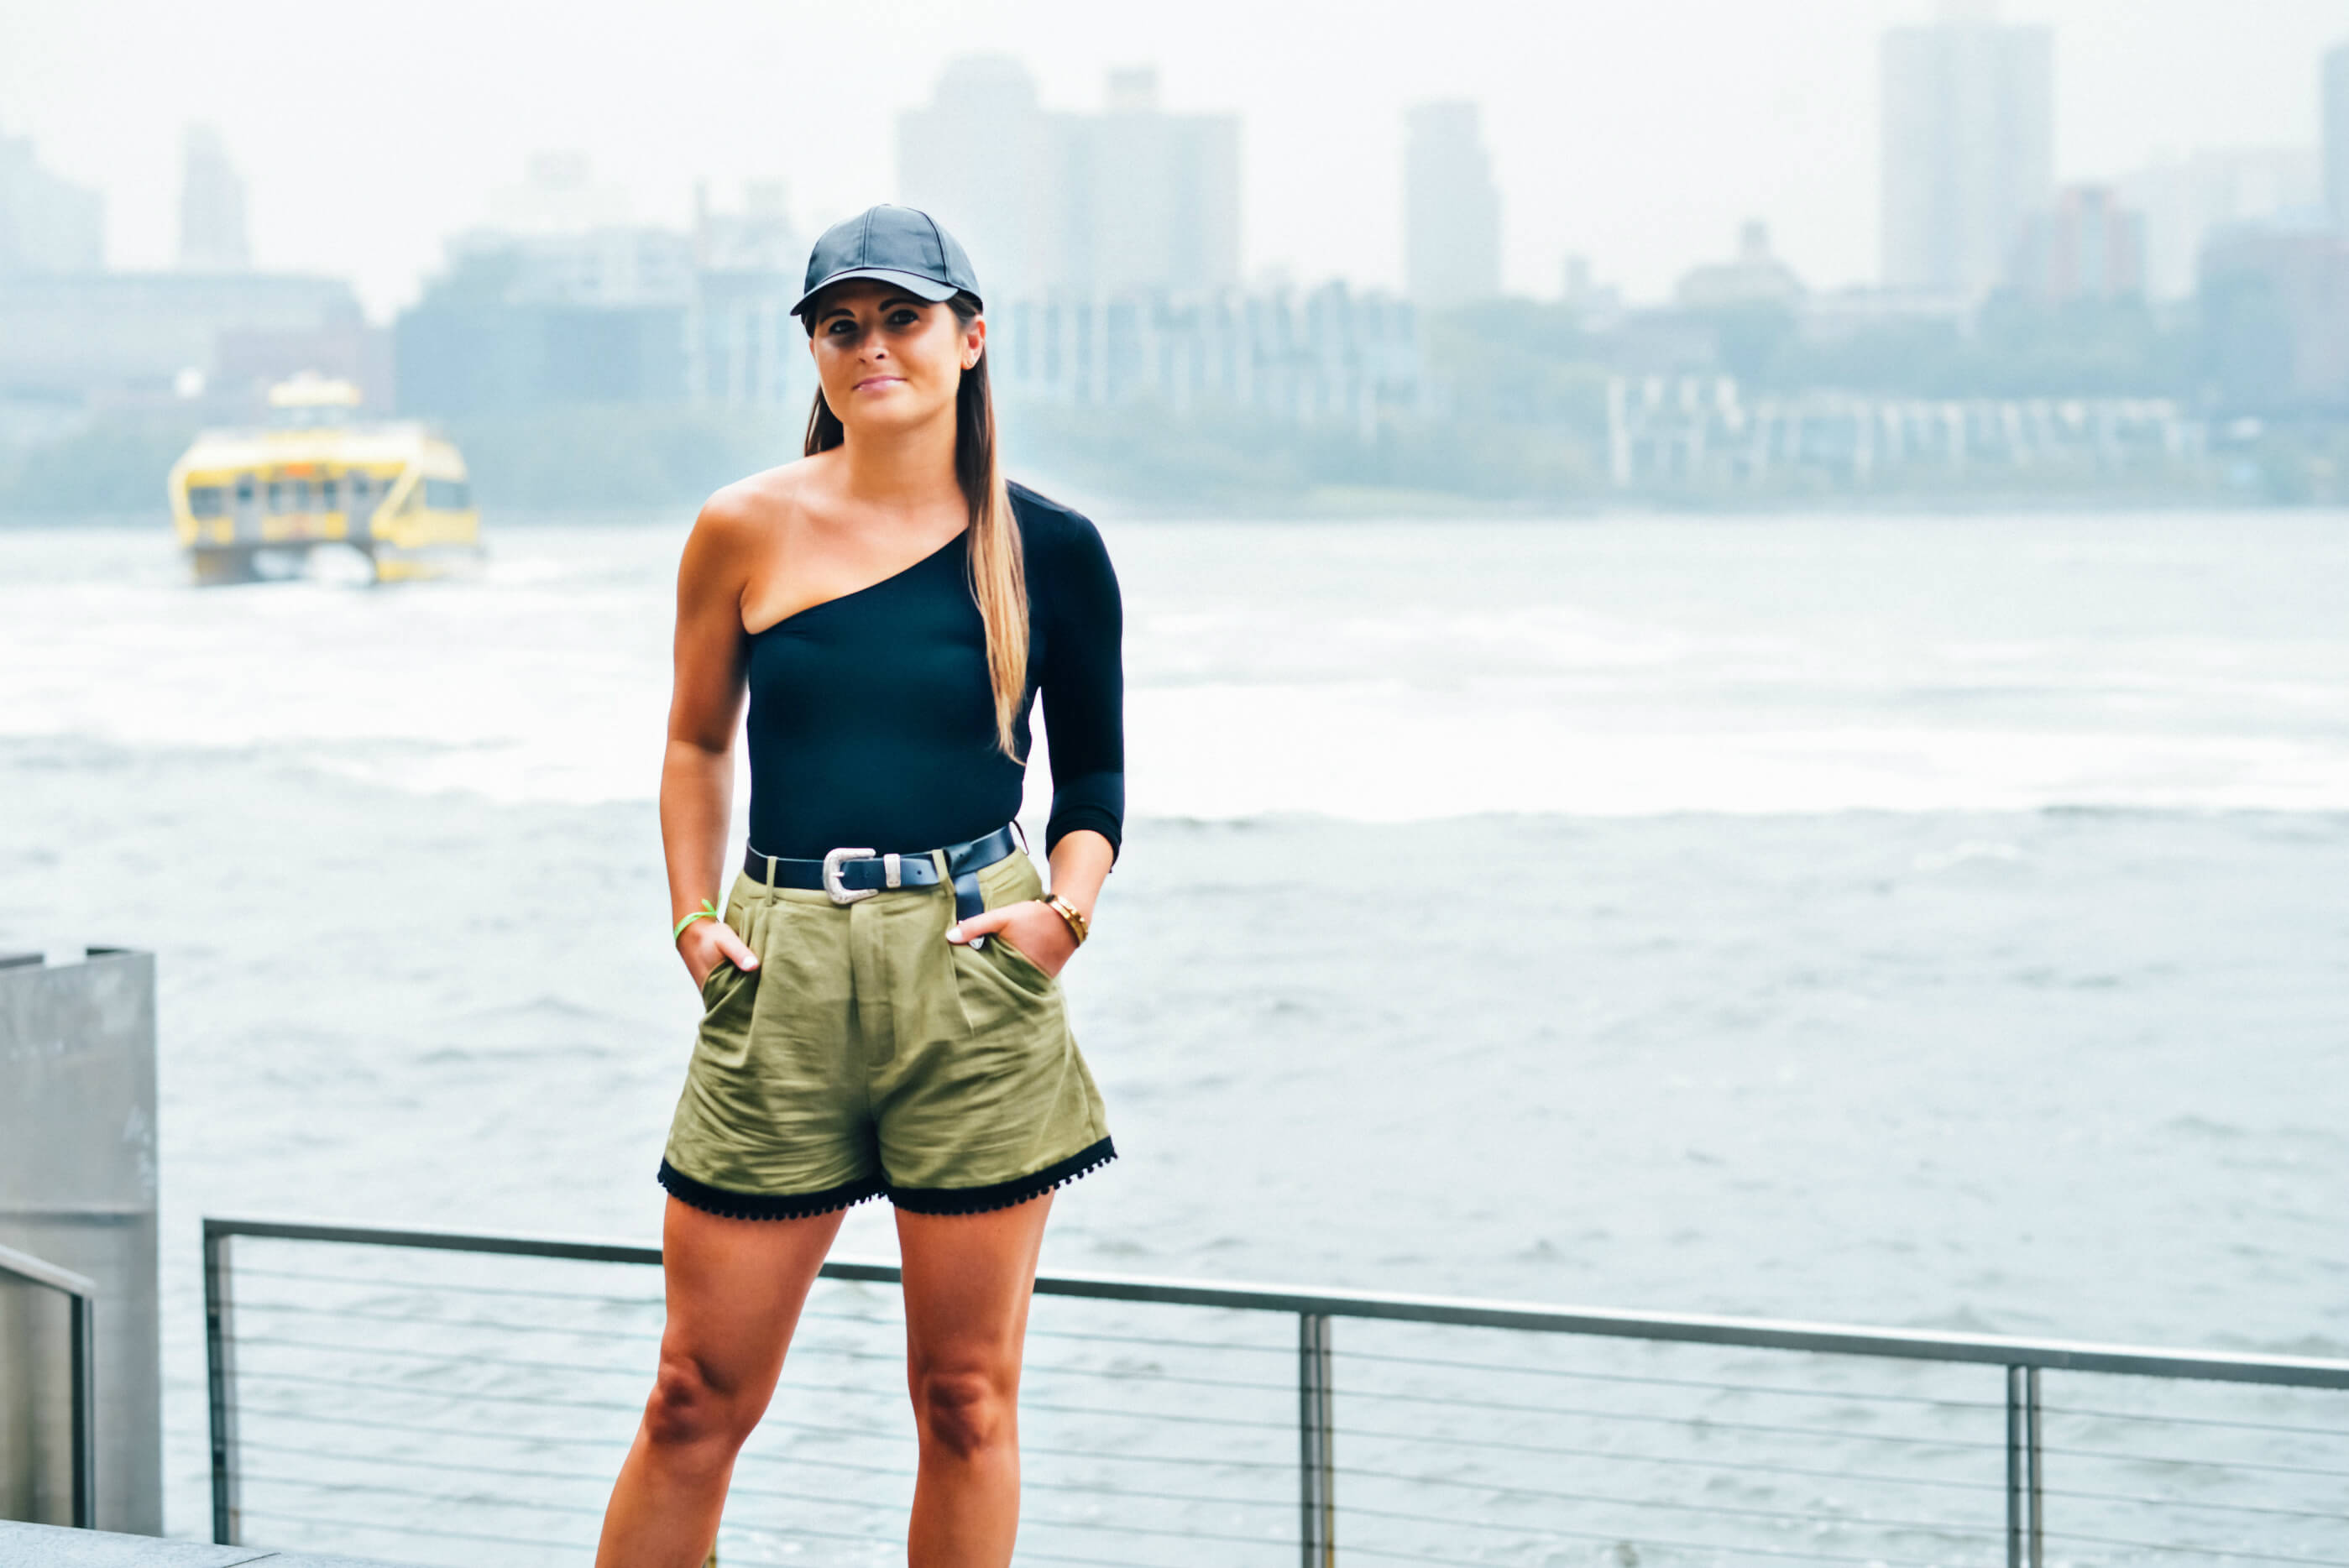 Commando One-Shoulder Bodysuit, Fall Outfit Ideas, Sporty Outfit, Leather Baseball Cap, Tilden of To Be Bright